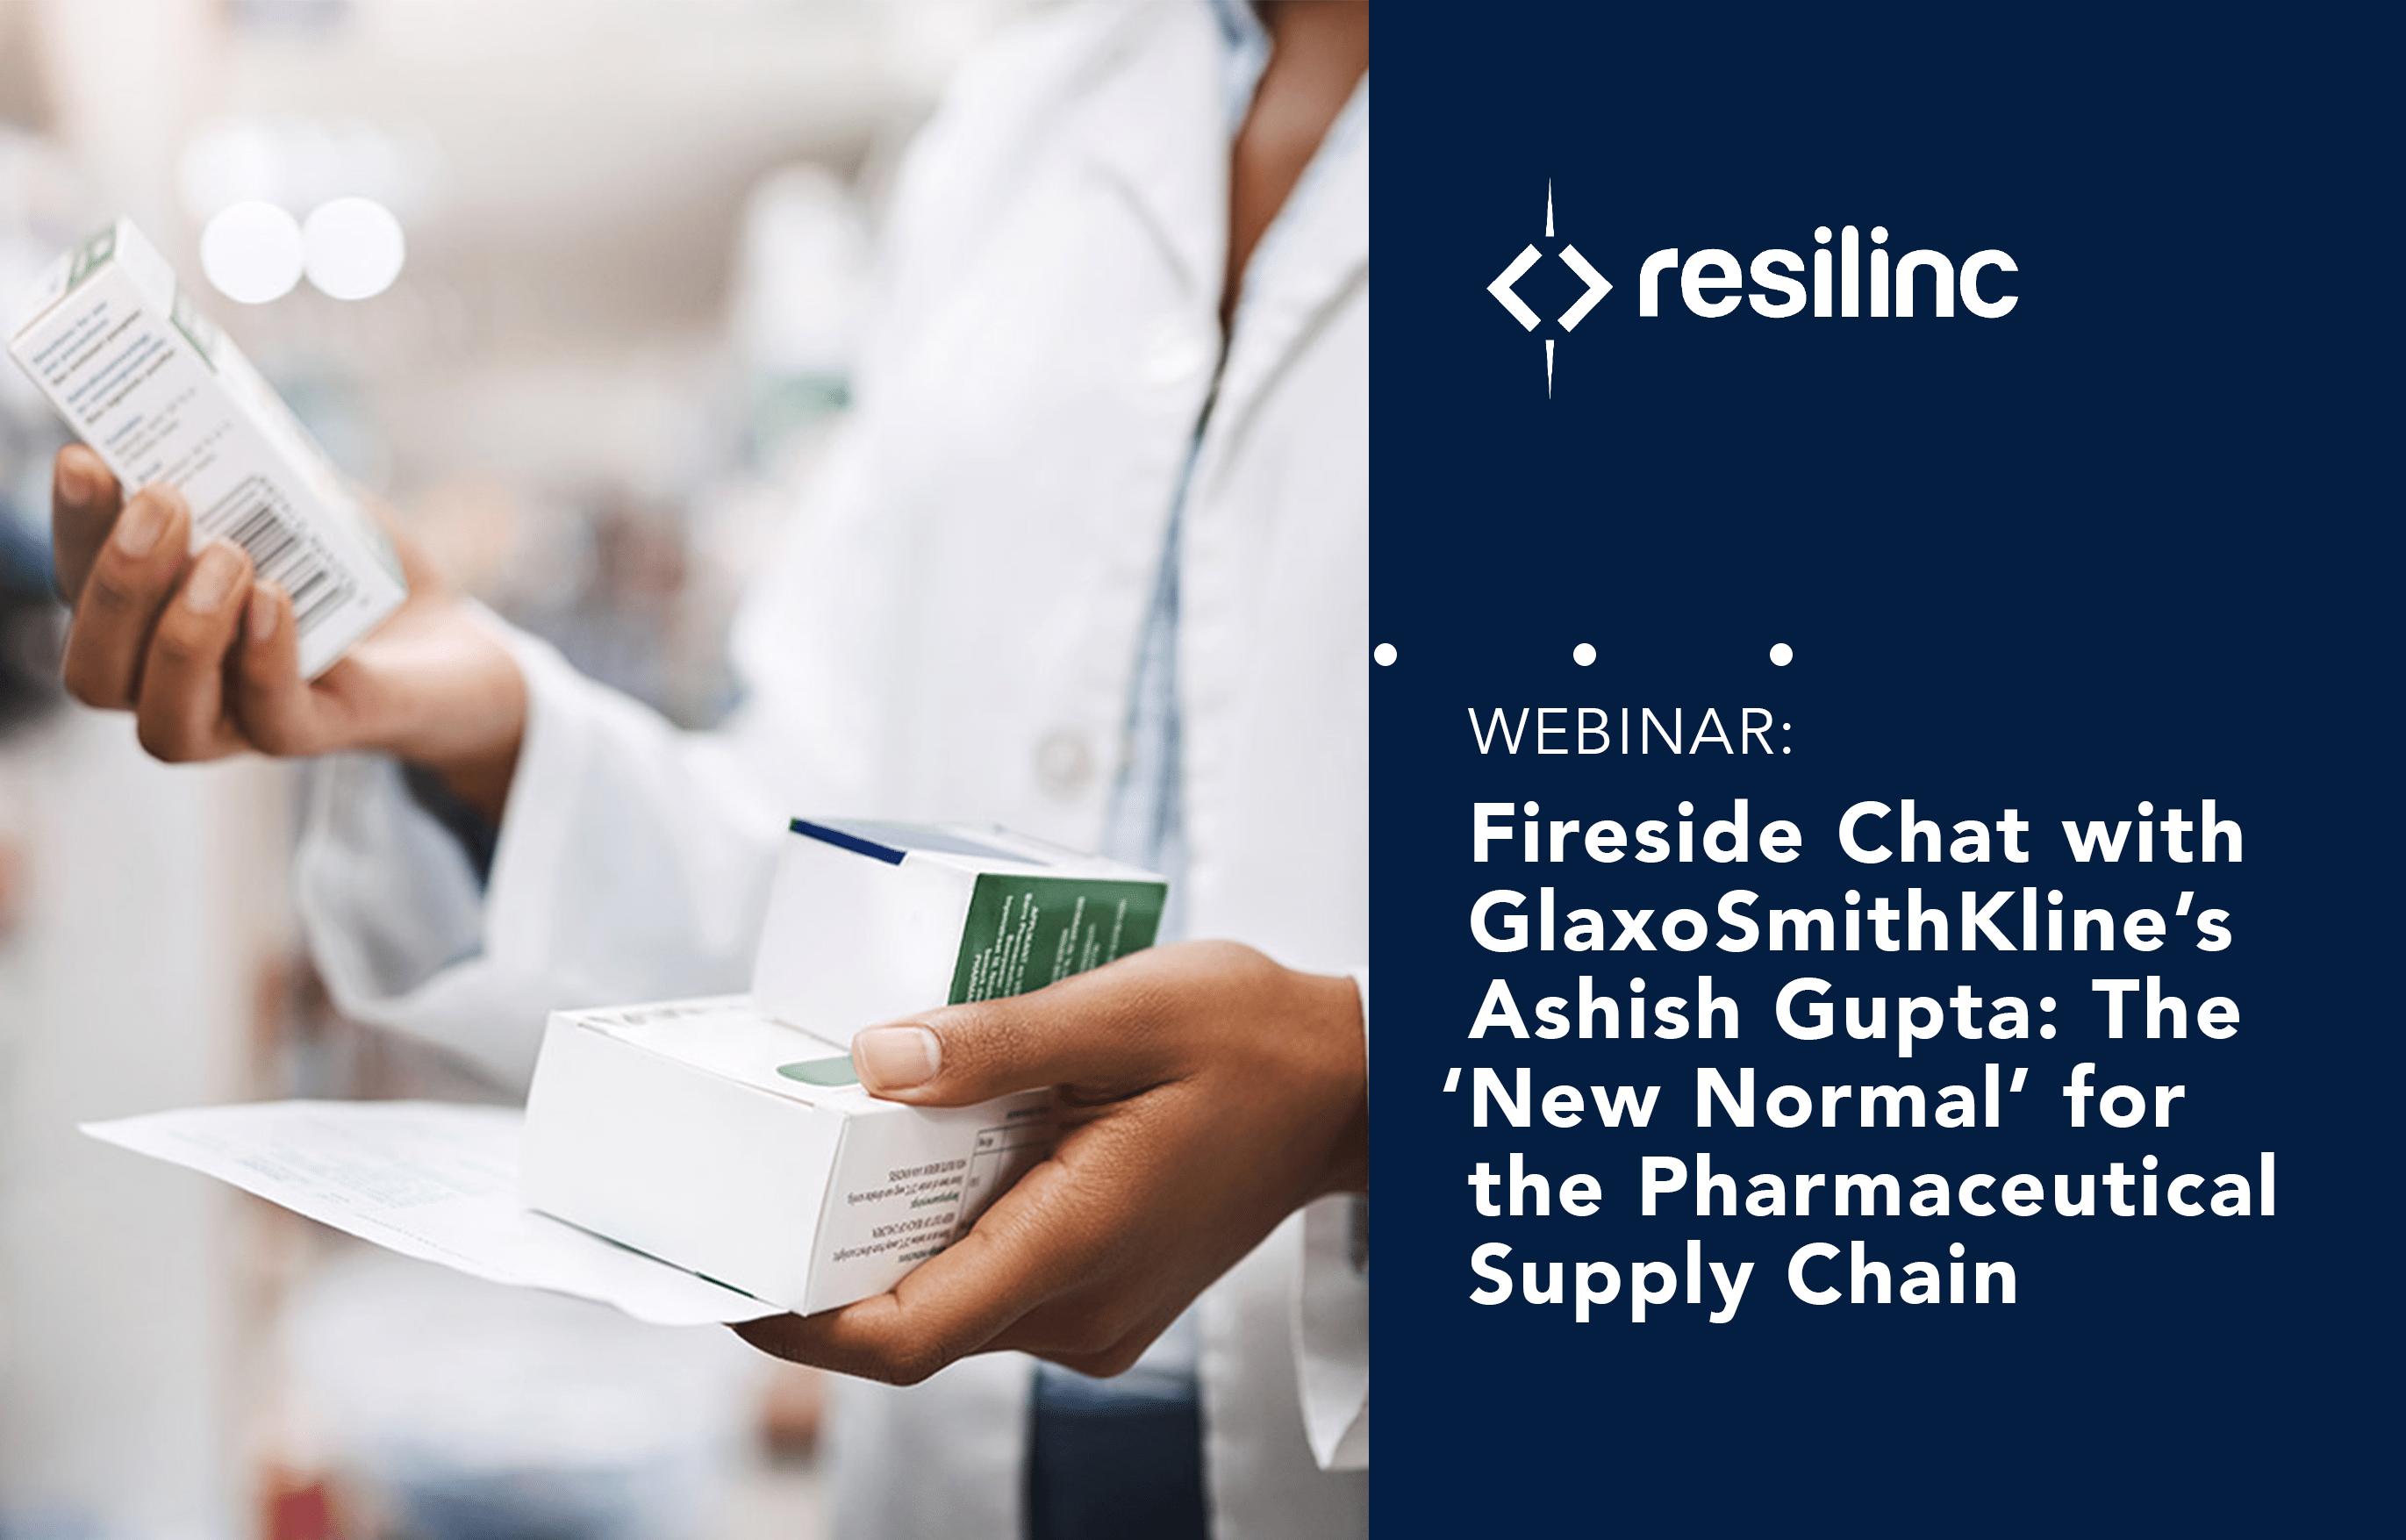 You are currently viewing Webinar: Fireside Chat with GlaxoSmithKline’s Ashish Gupta: The ‘New Normal’ for the Pharmaceutical Supply Chain